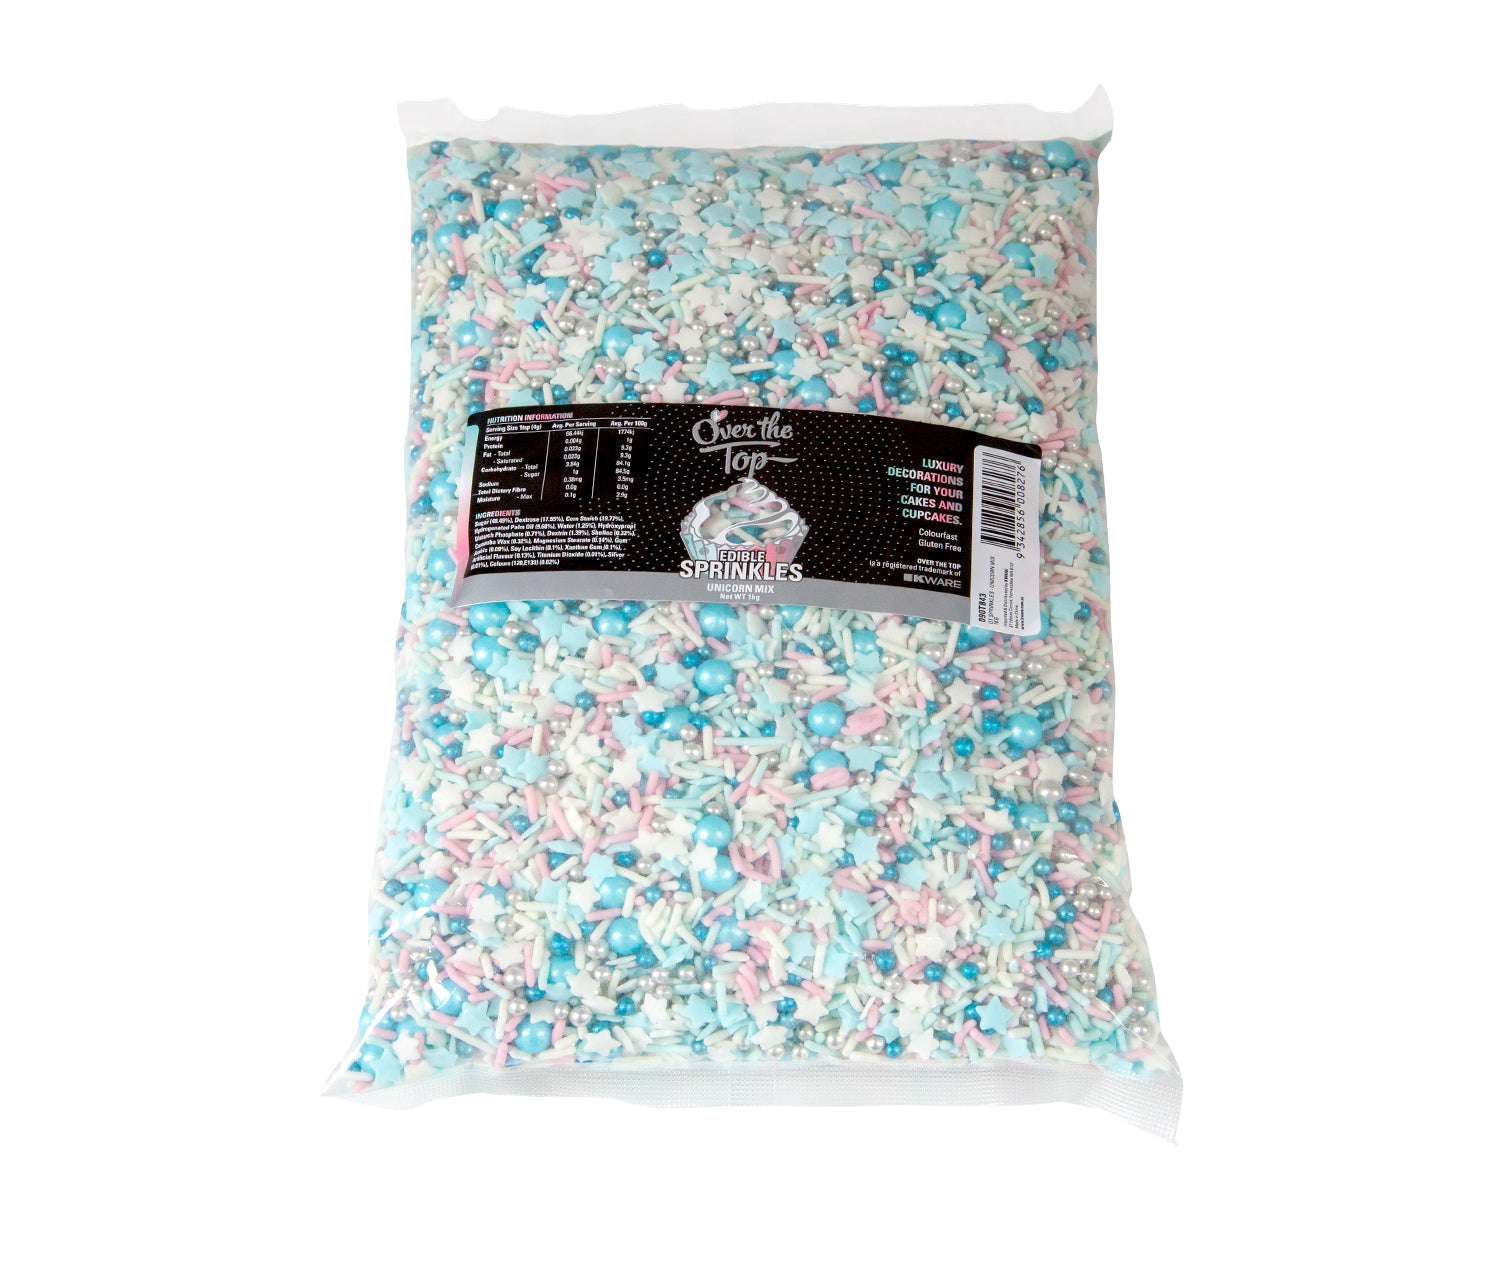 Over The Top Edible Bling Sprinkles - Unicorn Mix 1kg